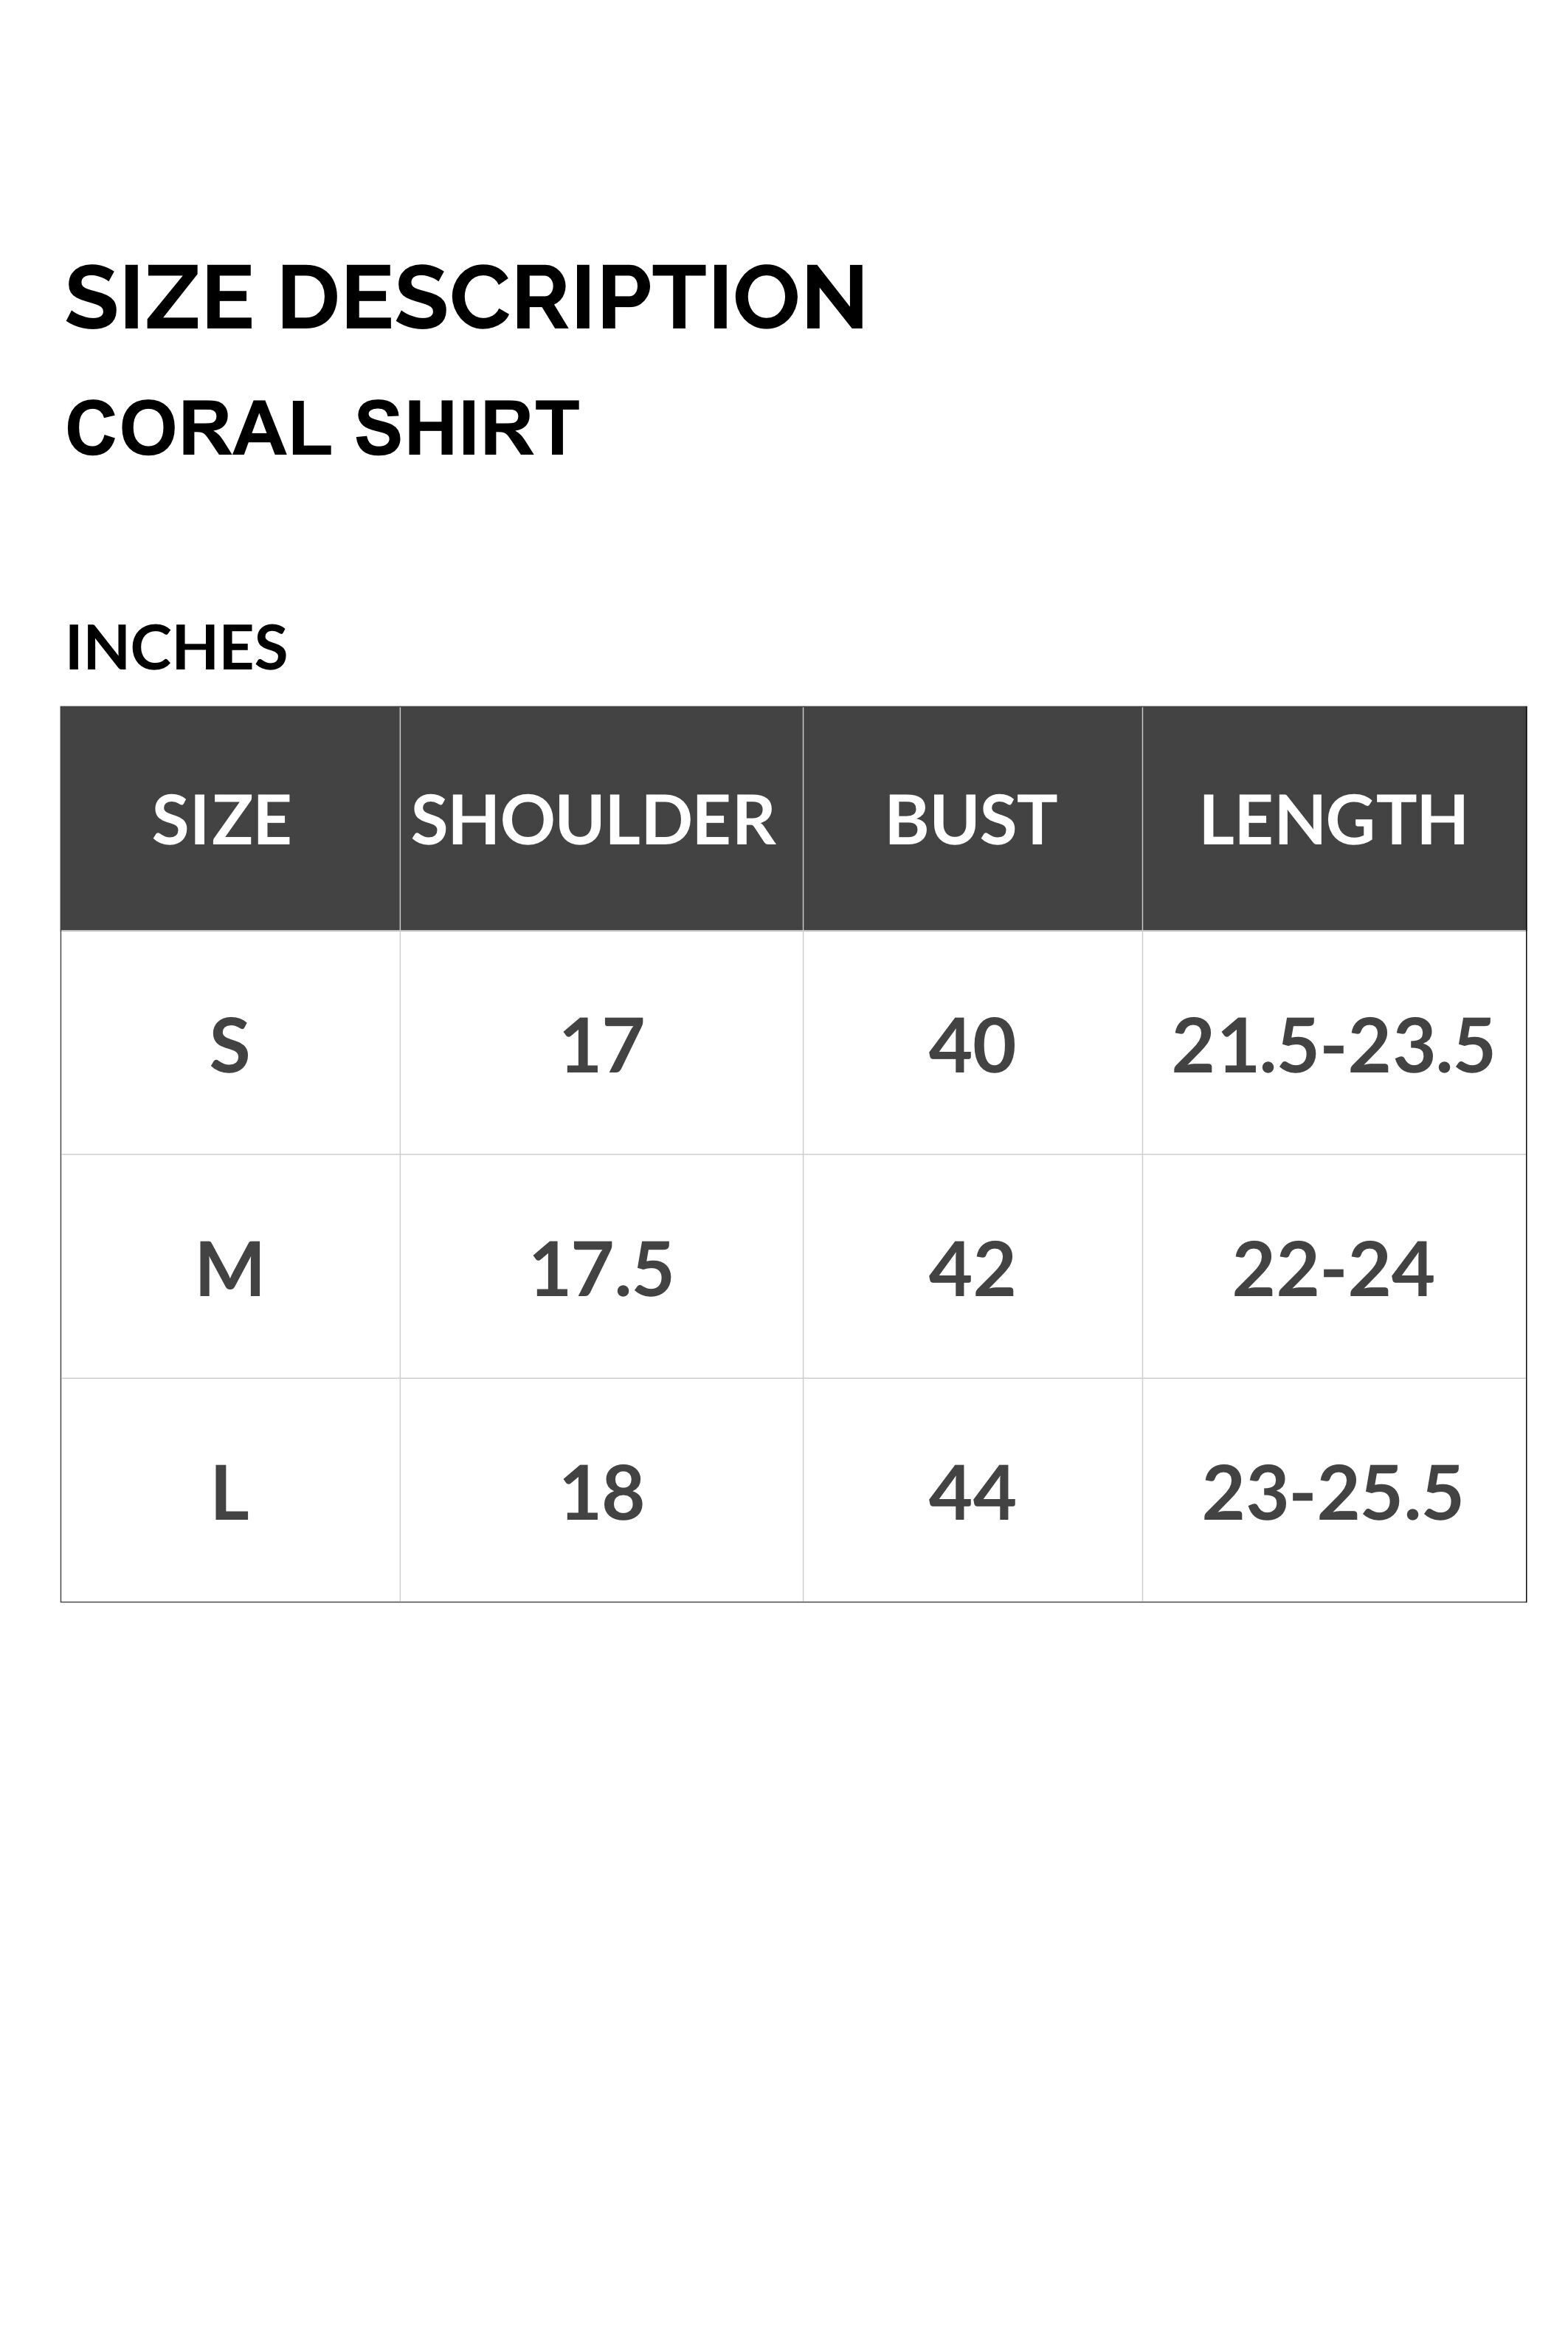 SIZE CORAL SHIRT